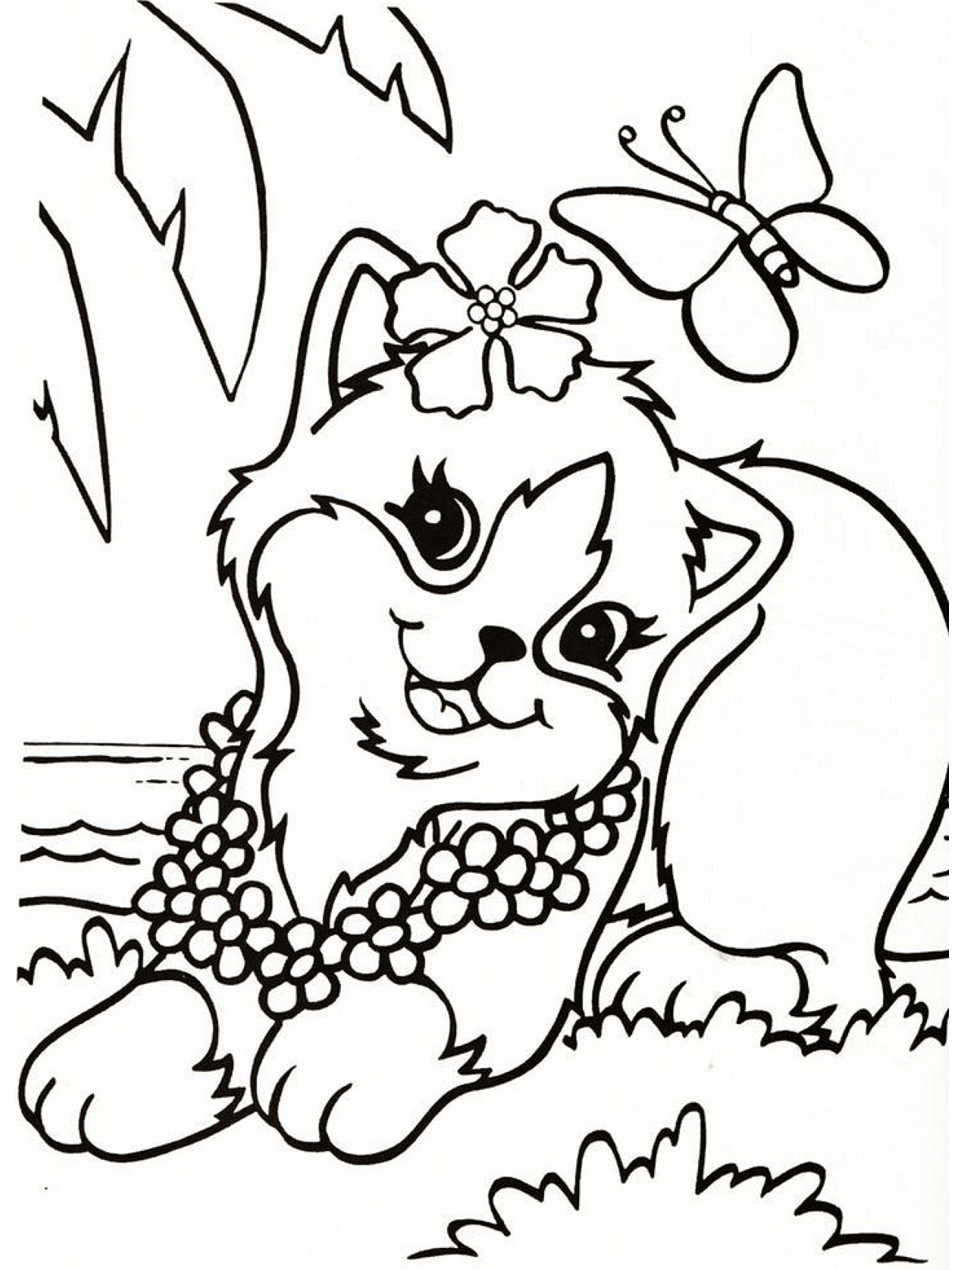 Pretty Cat Lisa Frank Coloring Page Free Printable Coloring Pages For